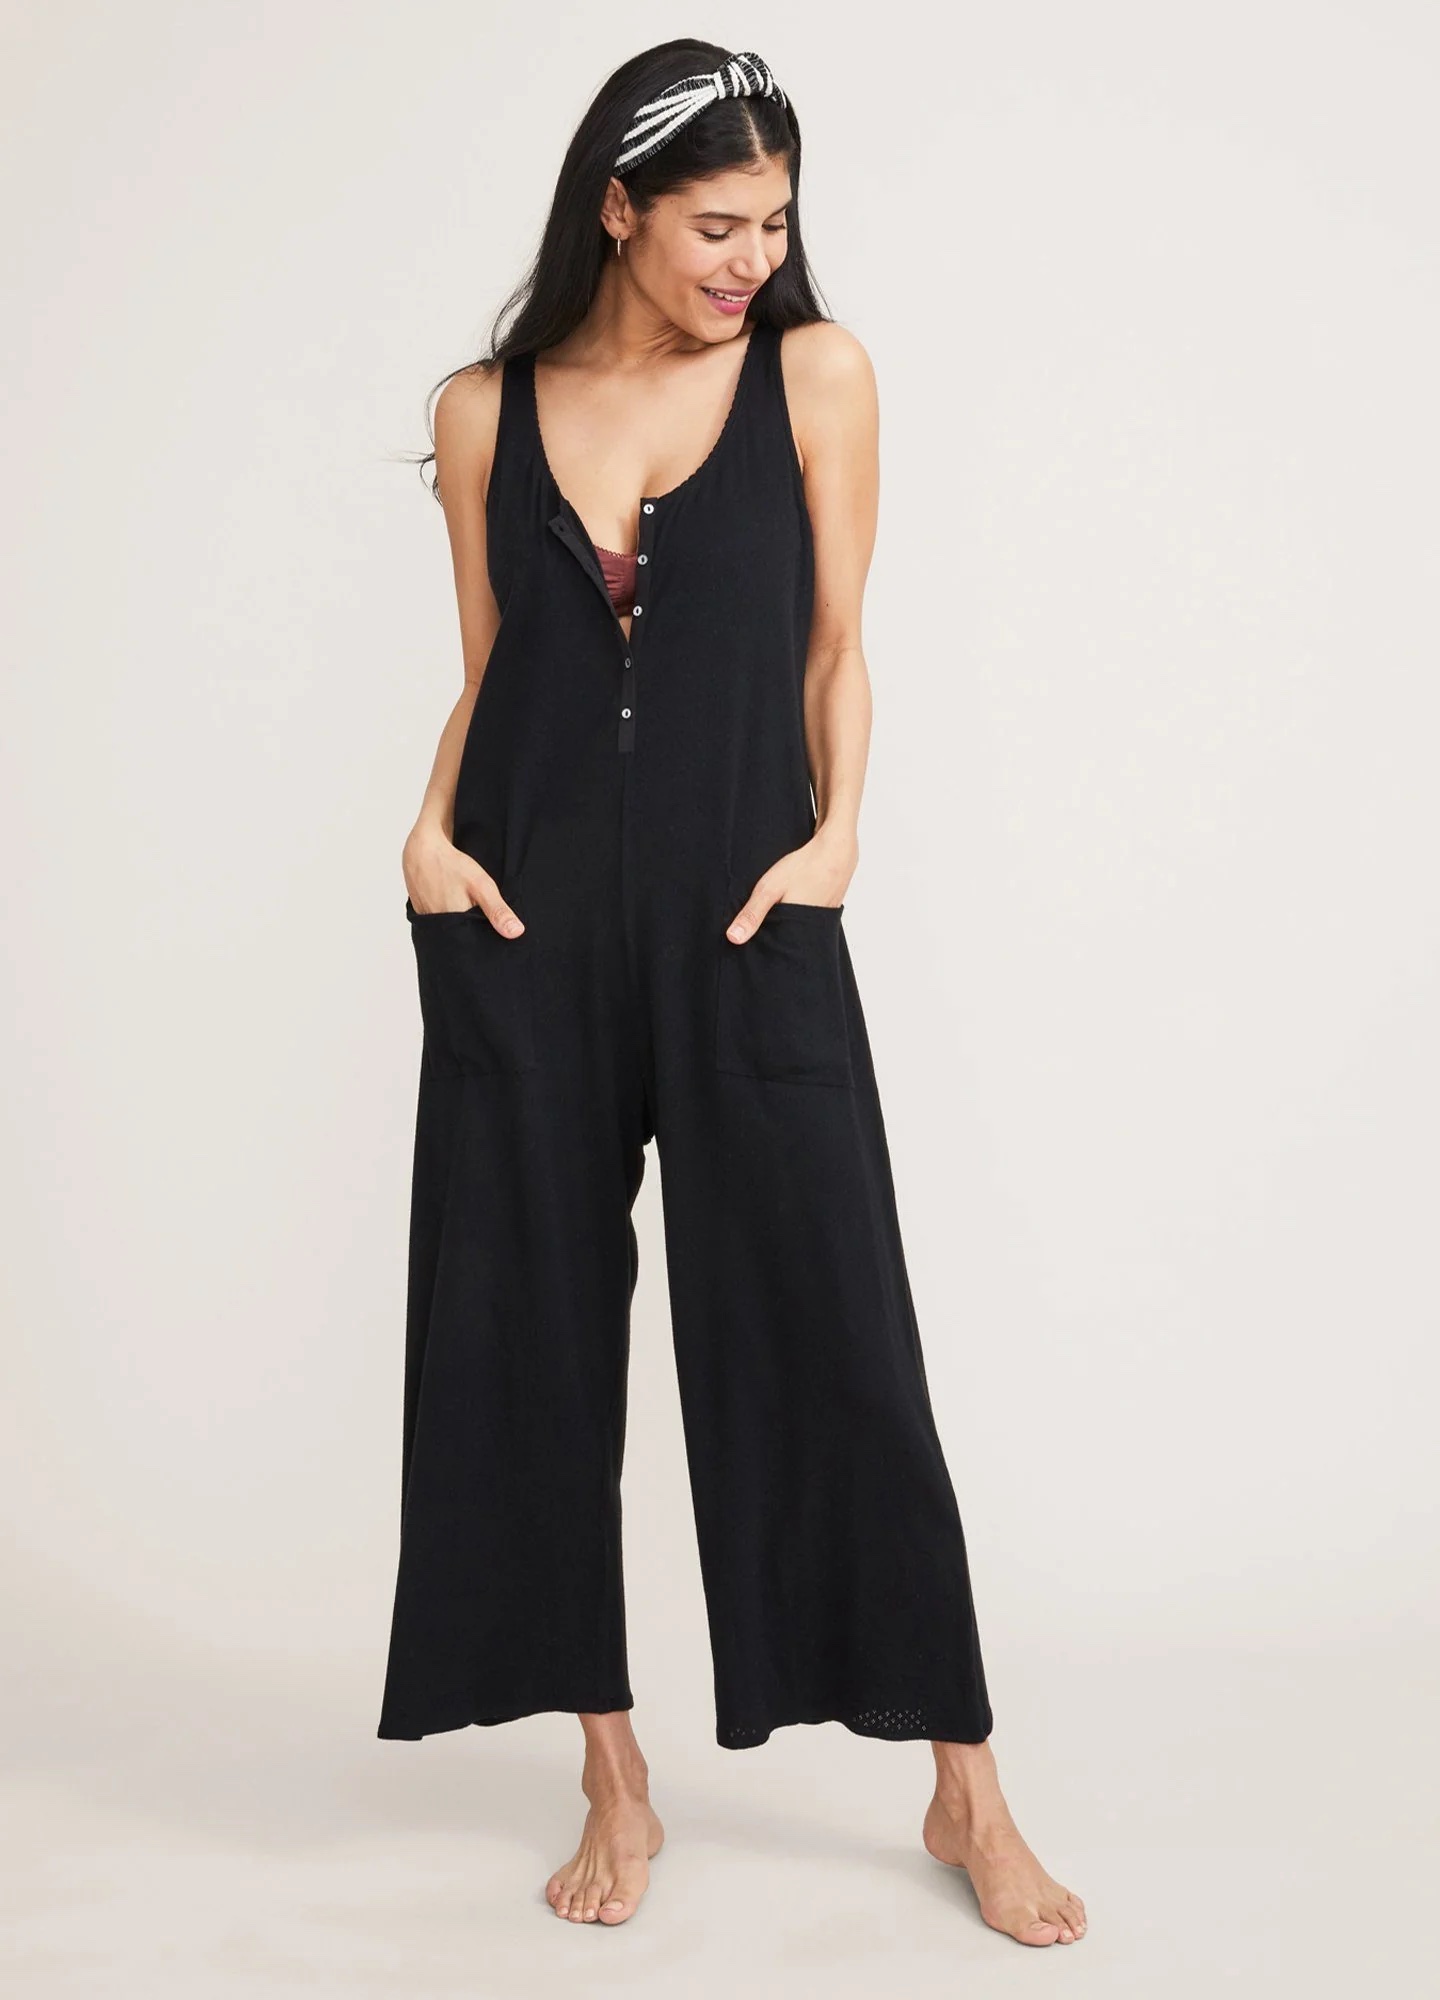 A model has her hands in the pockets of a black nursing jumpsuit.